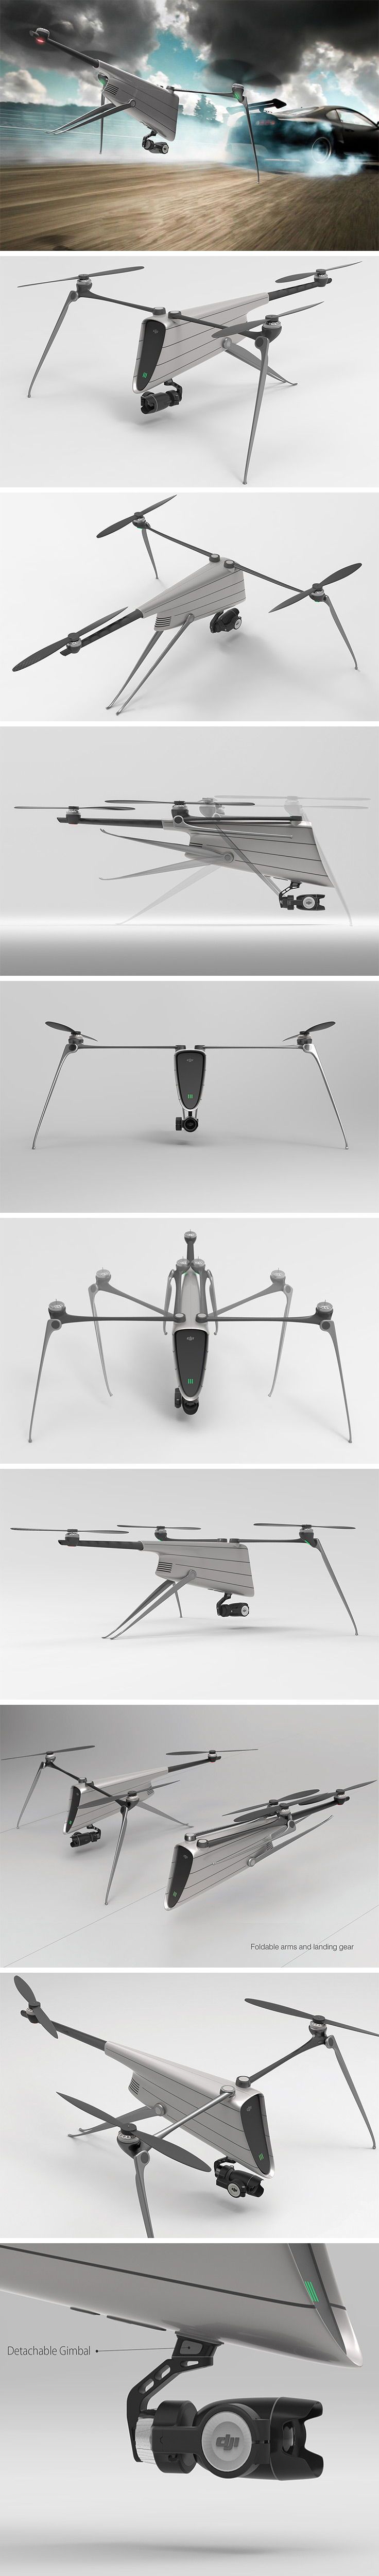 If just looking at this drone makes you itch, you’re not alone. Designer Arman...